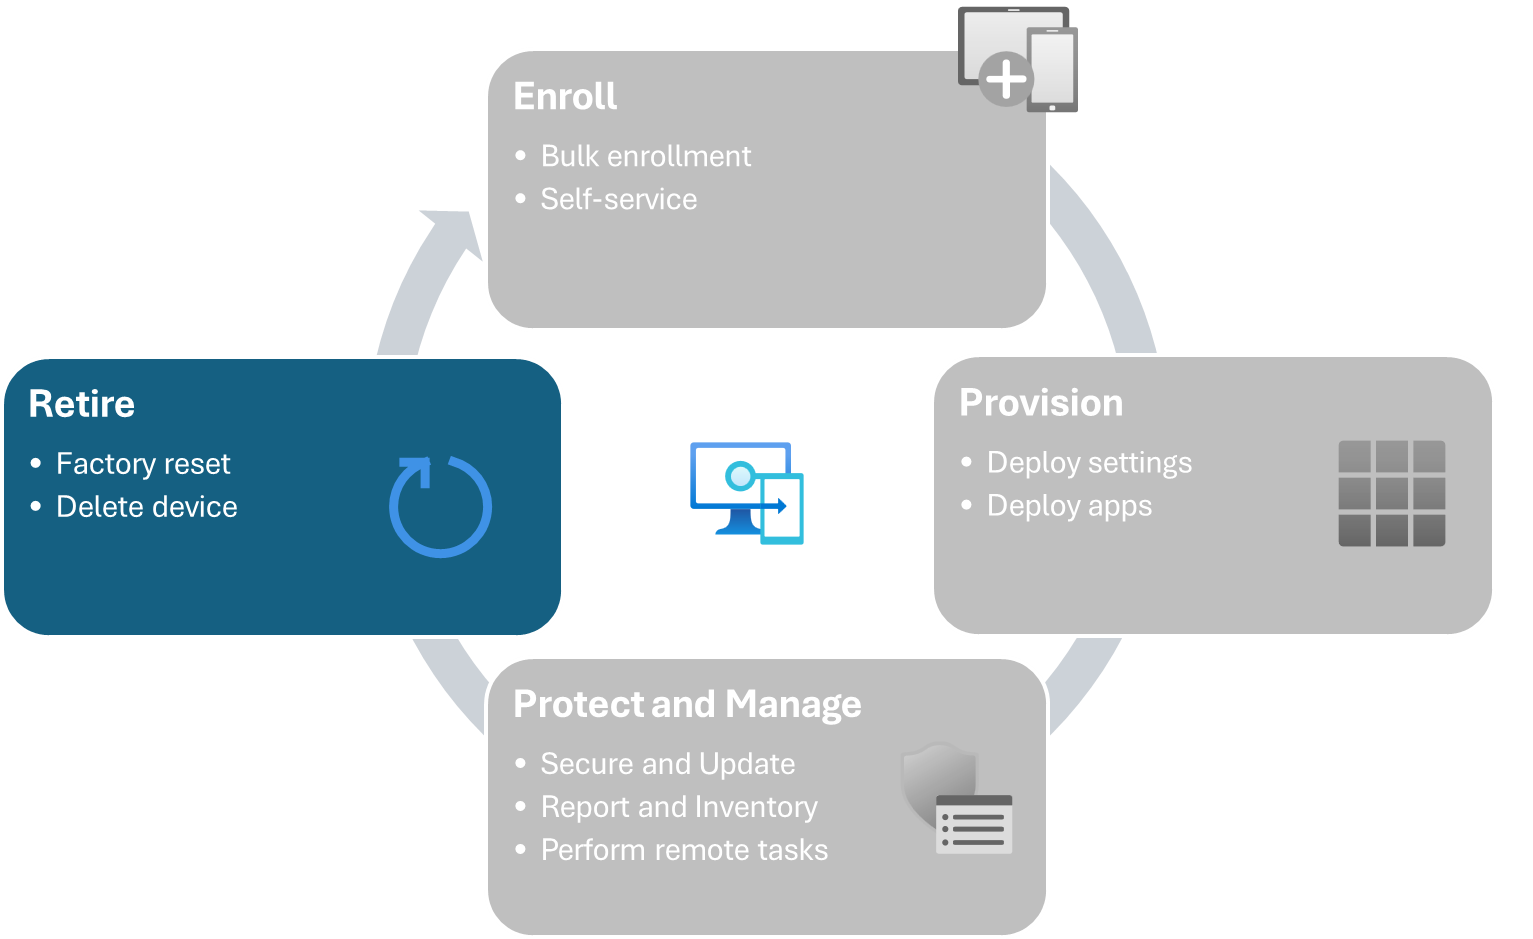 The device lifecycle for Intune-managed devices - retirement